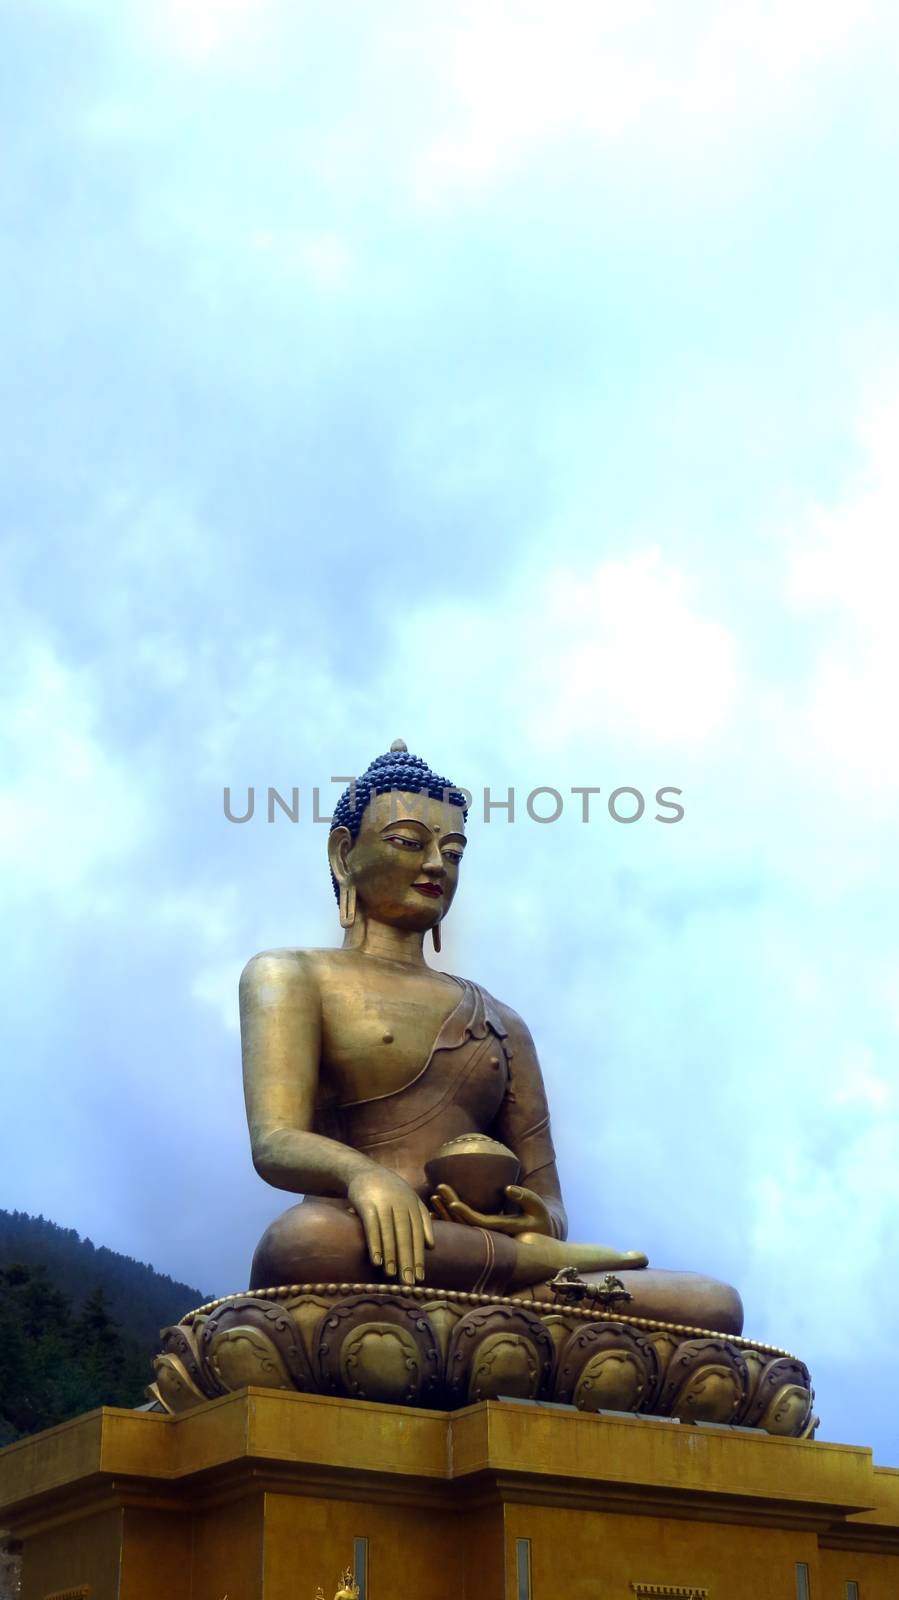 Tallest Buddha in Bhutan by thefinalmiracle